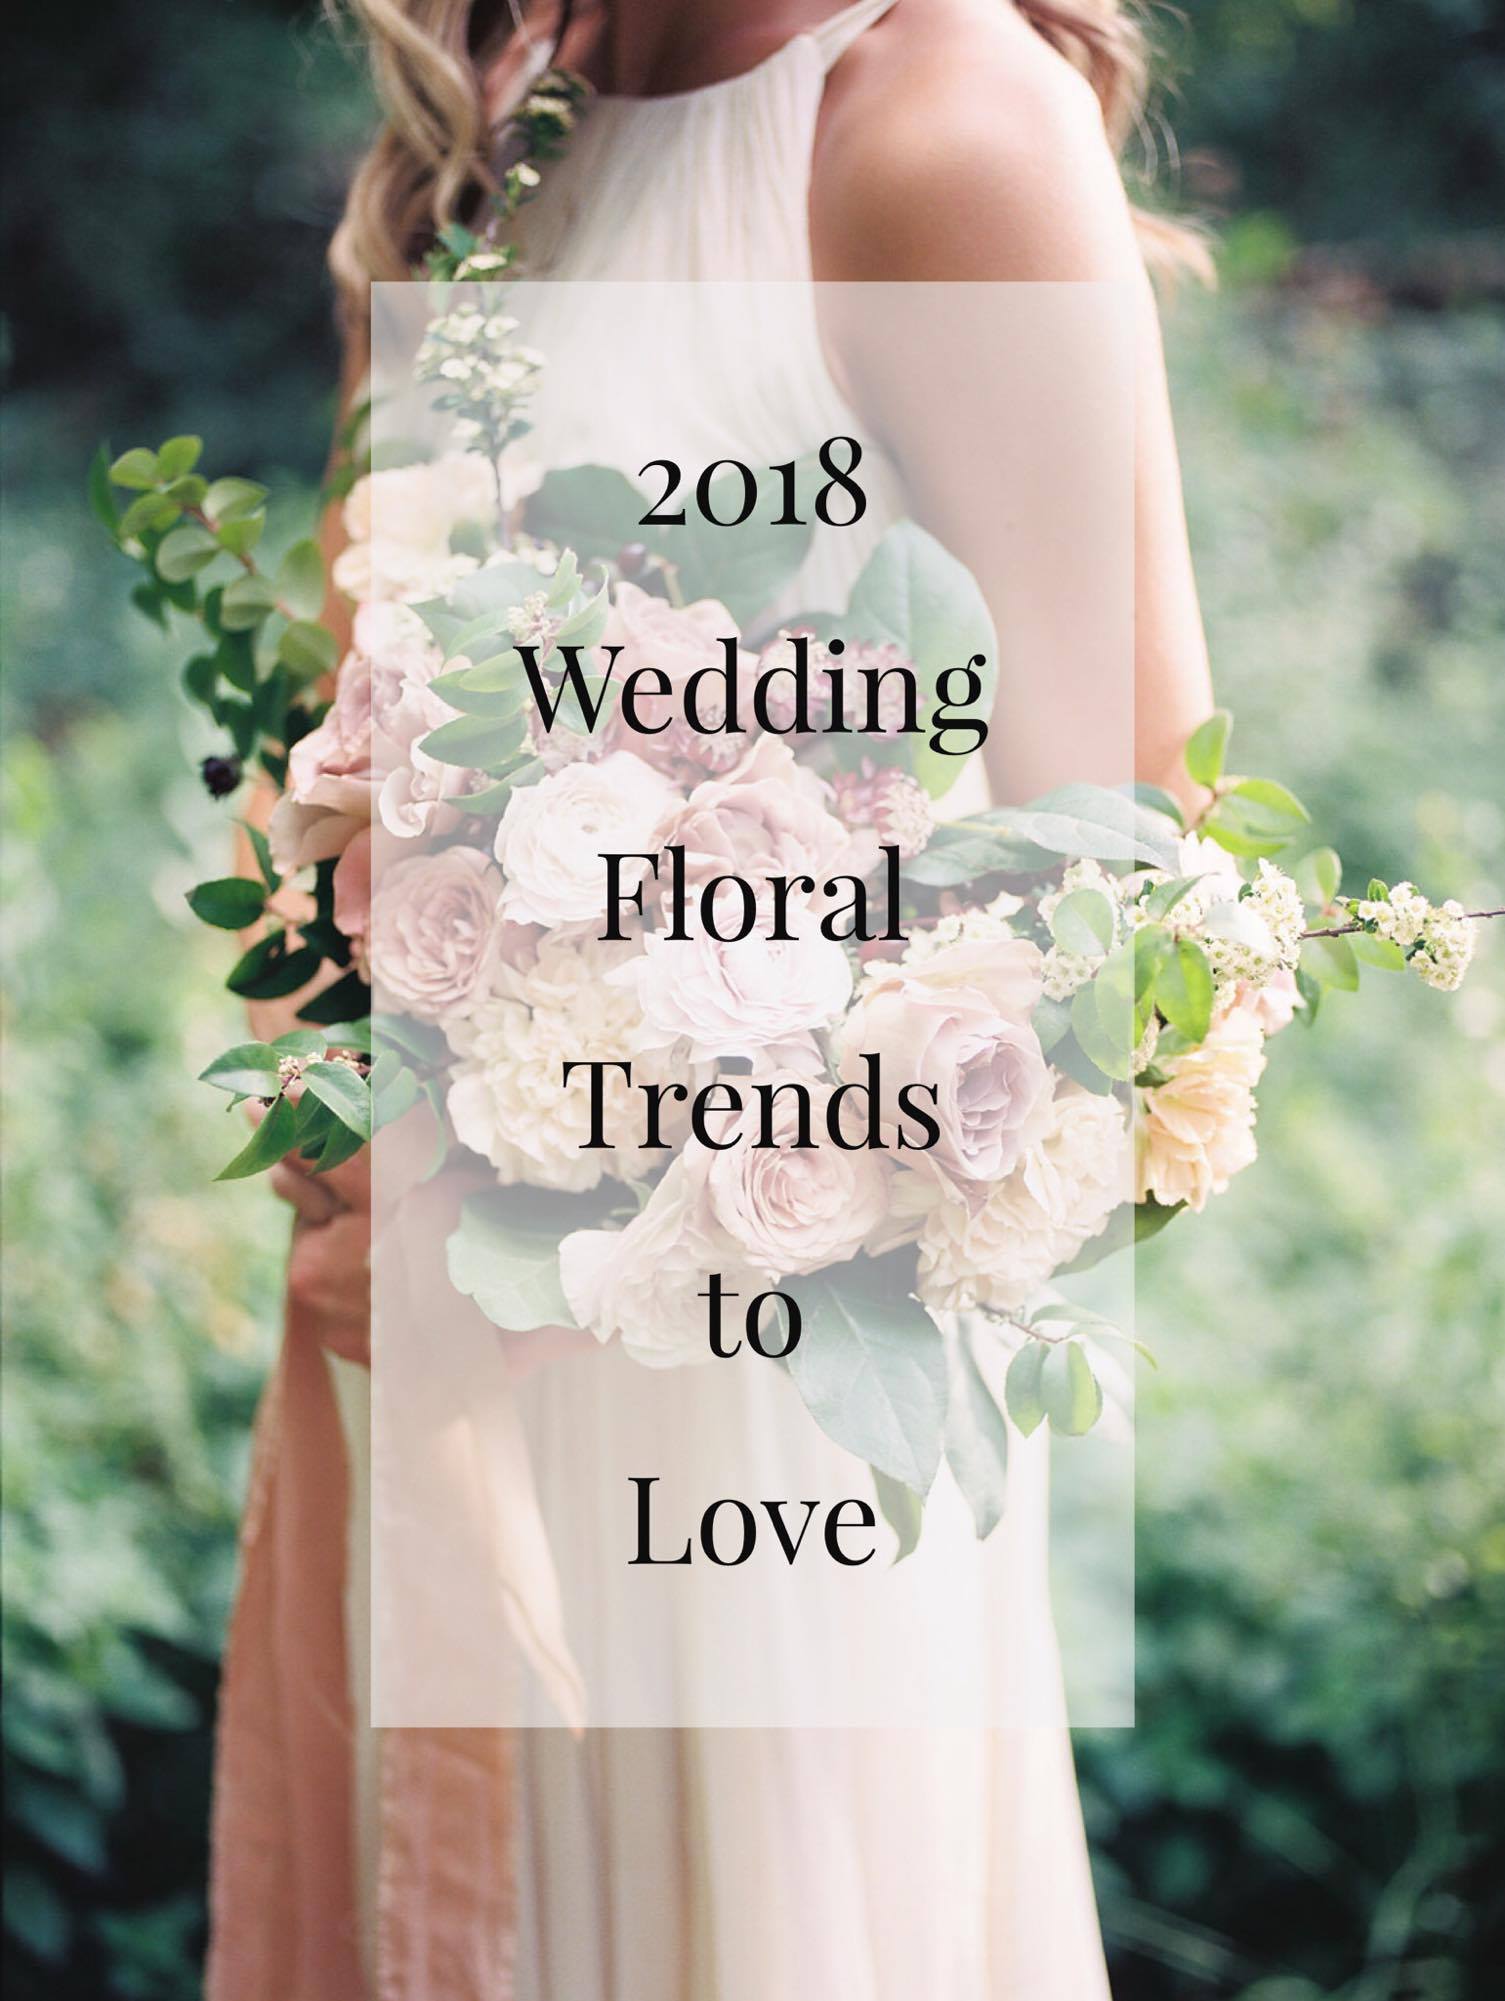 2017-2018 Wedding Floral Trends to Love